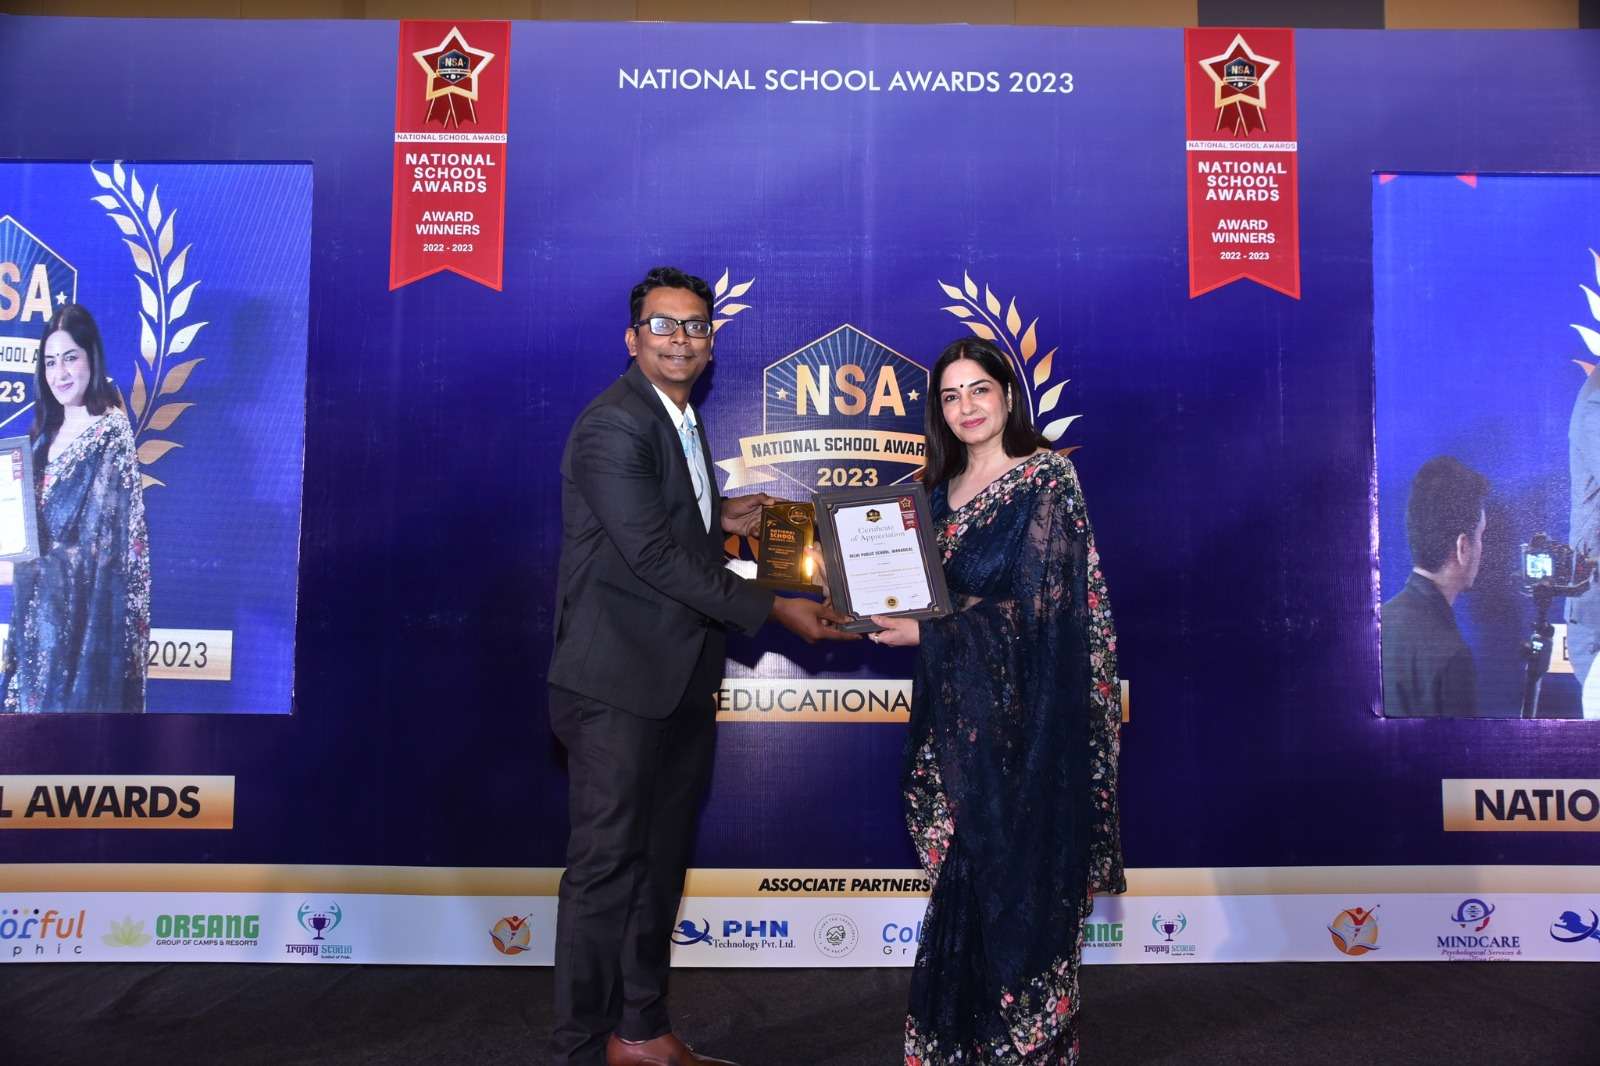 DPS Warangal secured two top honors this year: the Best Residential School of 2023 and the Exceptional Contribution to Sports Award.